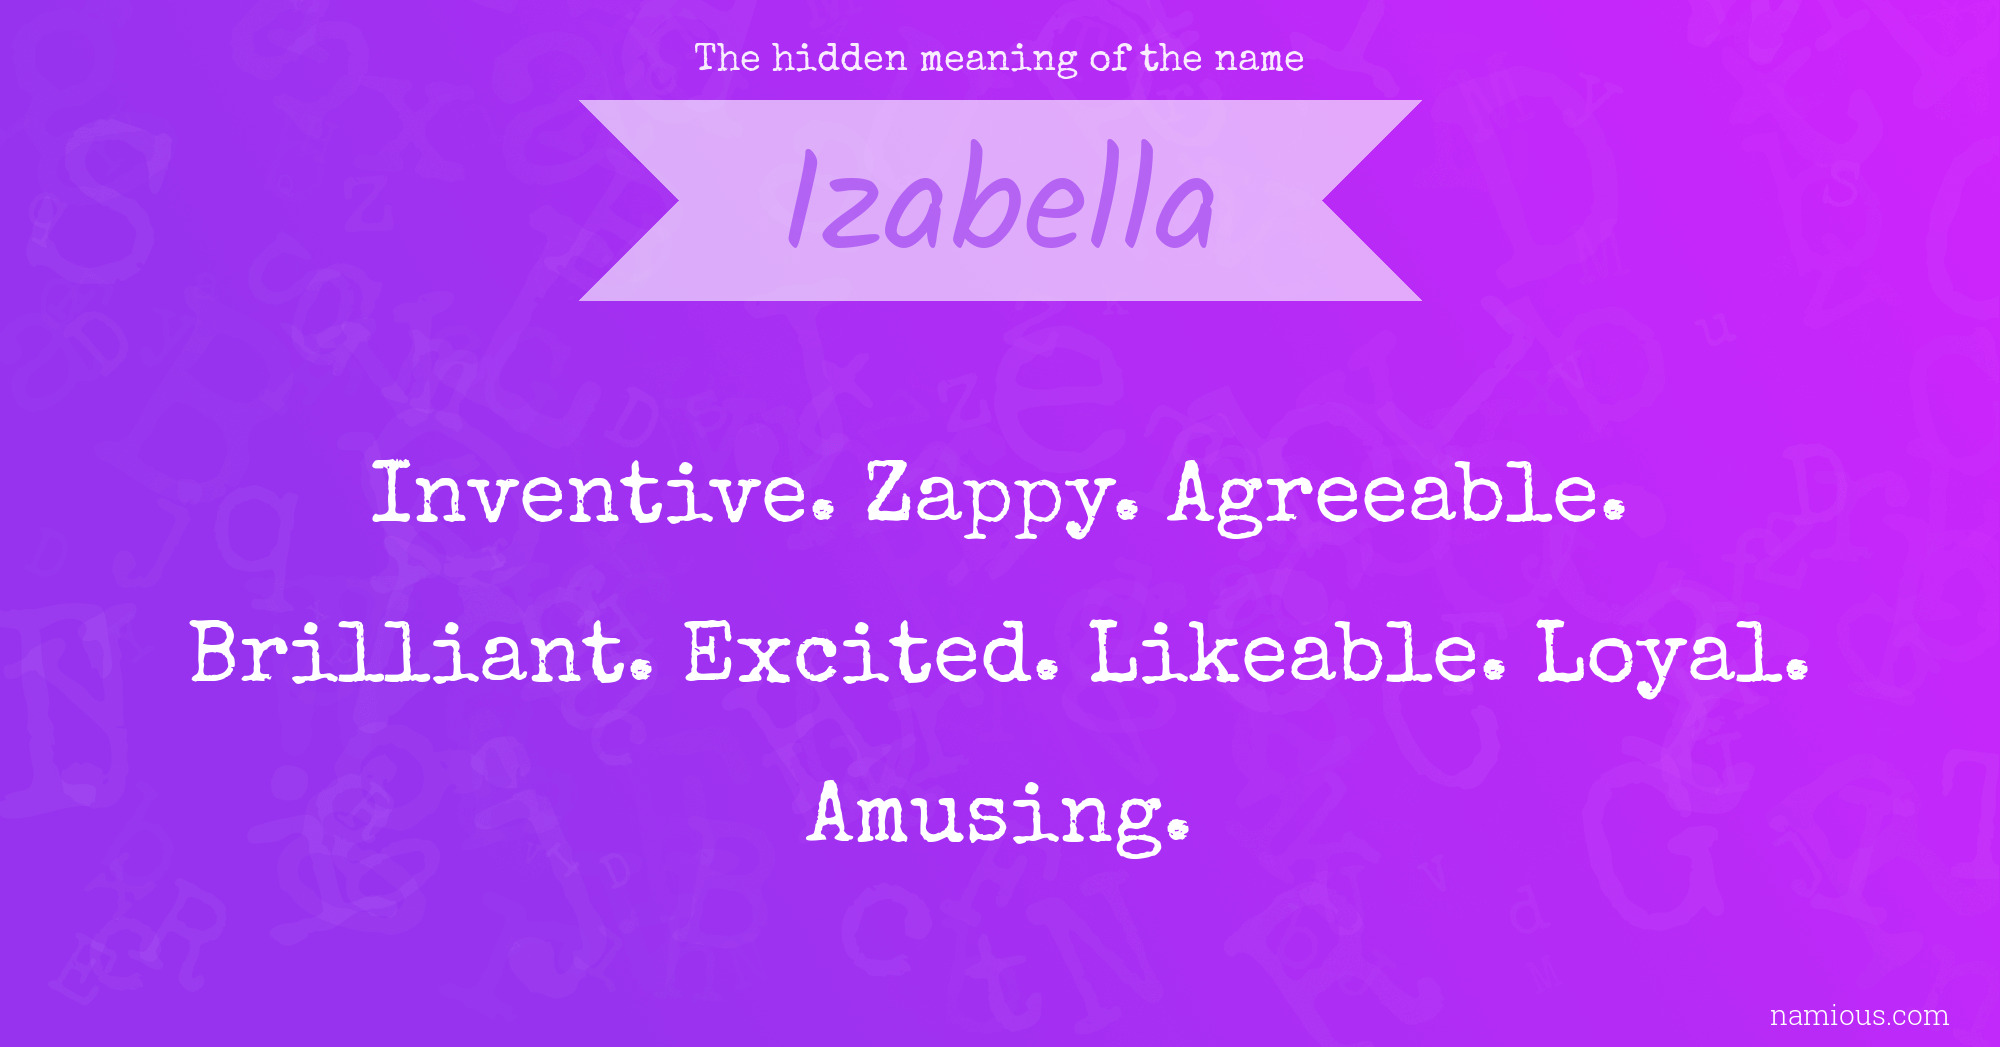 The hidden meaning of the name Izabella